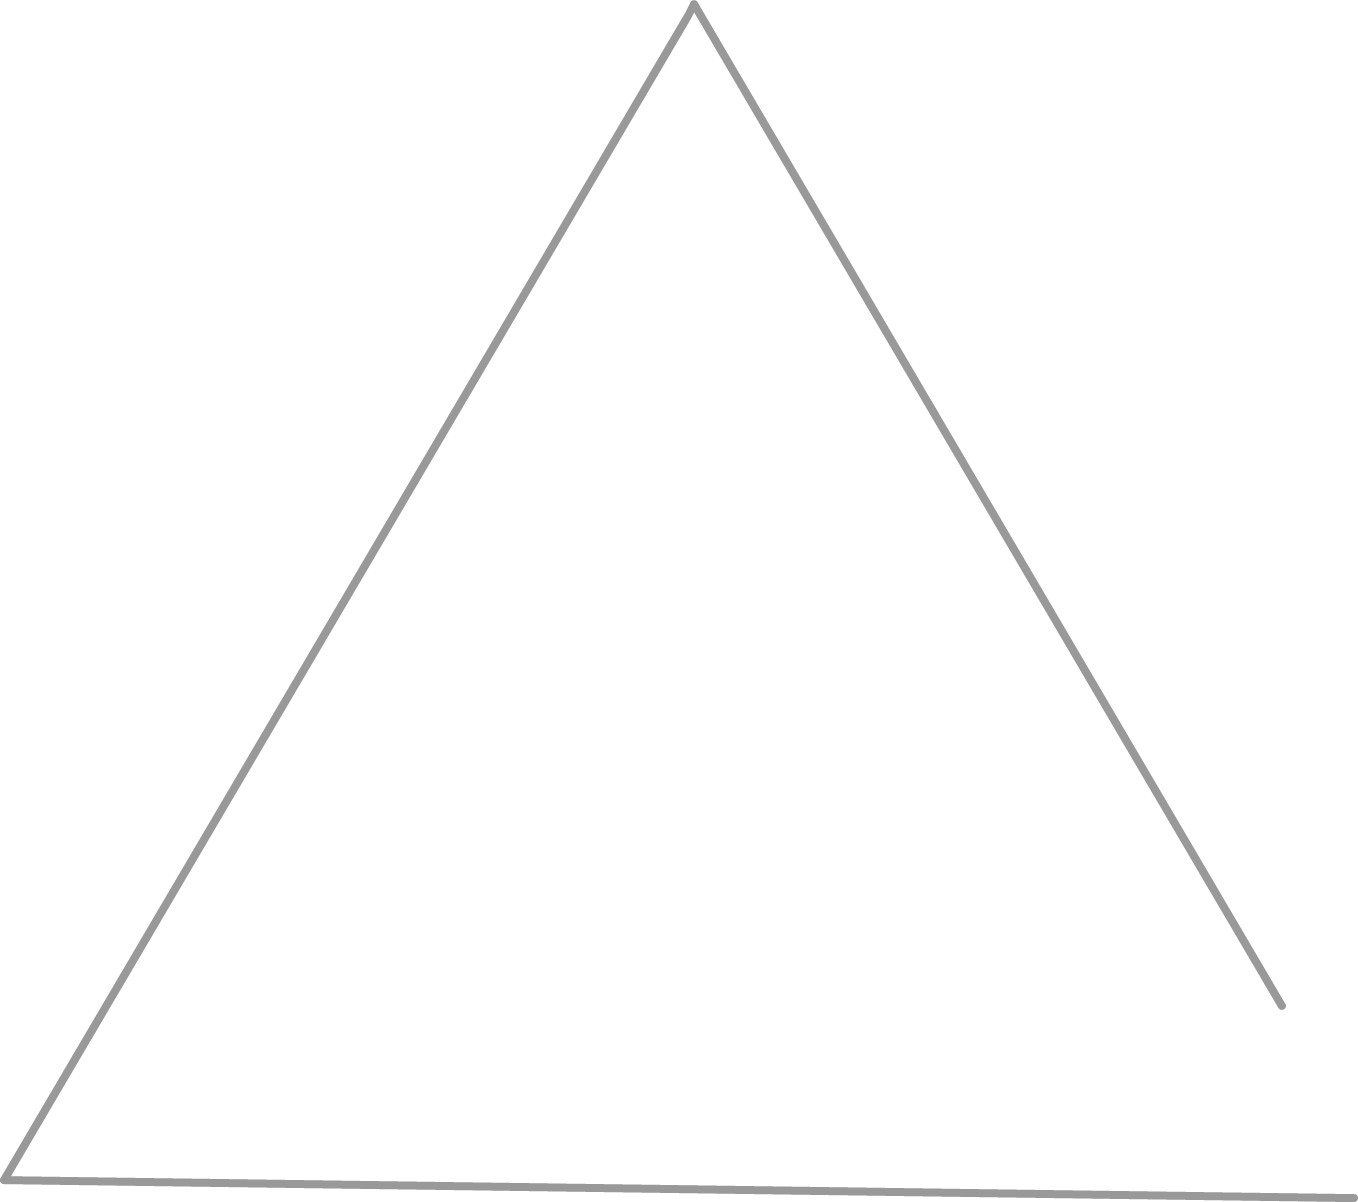 Triangle Png Free Download - Triangle, Transparent background PNG HD thumbnail